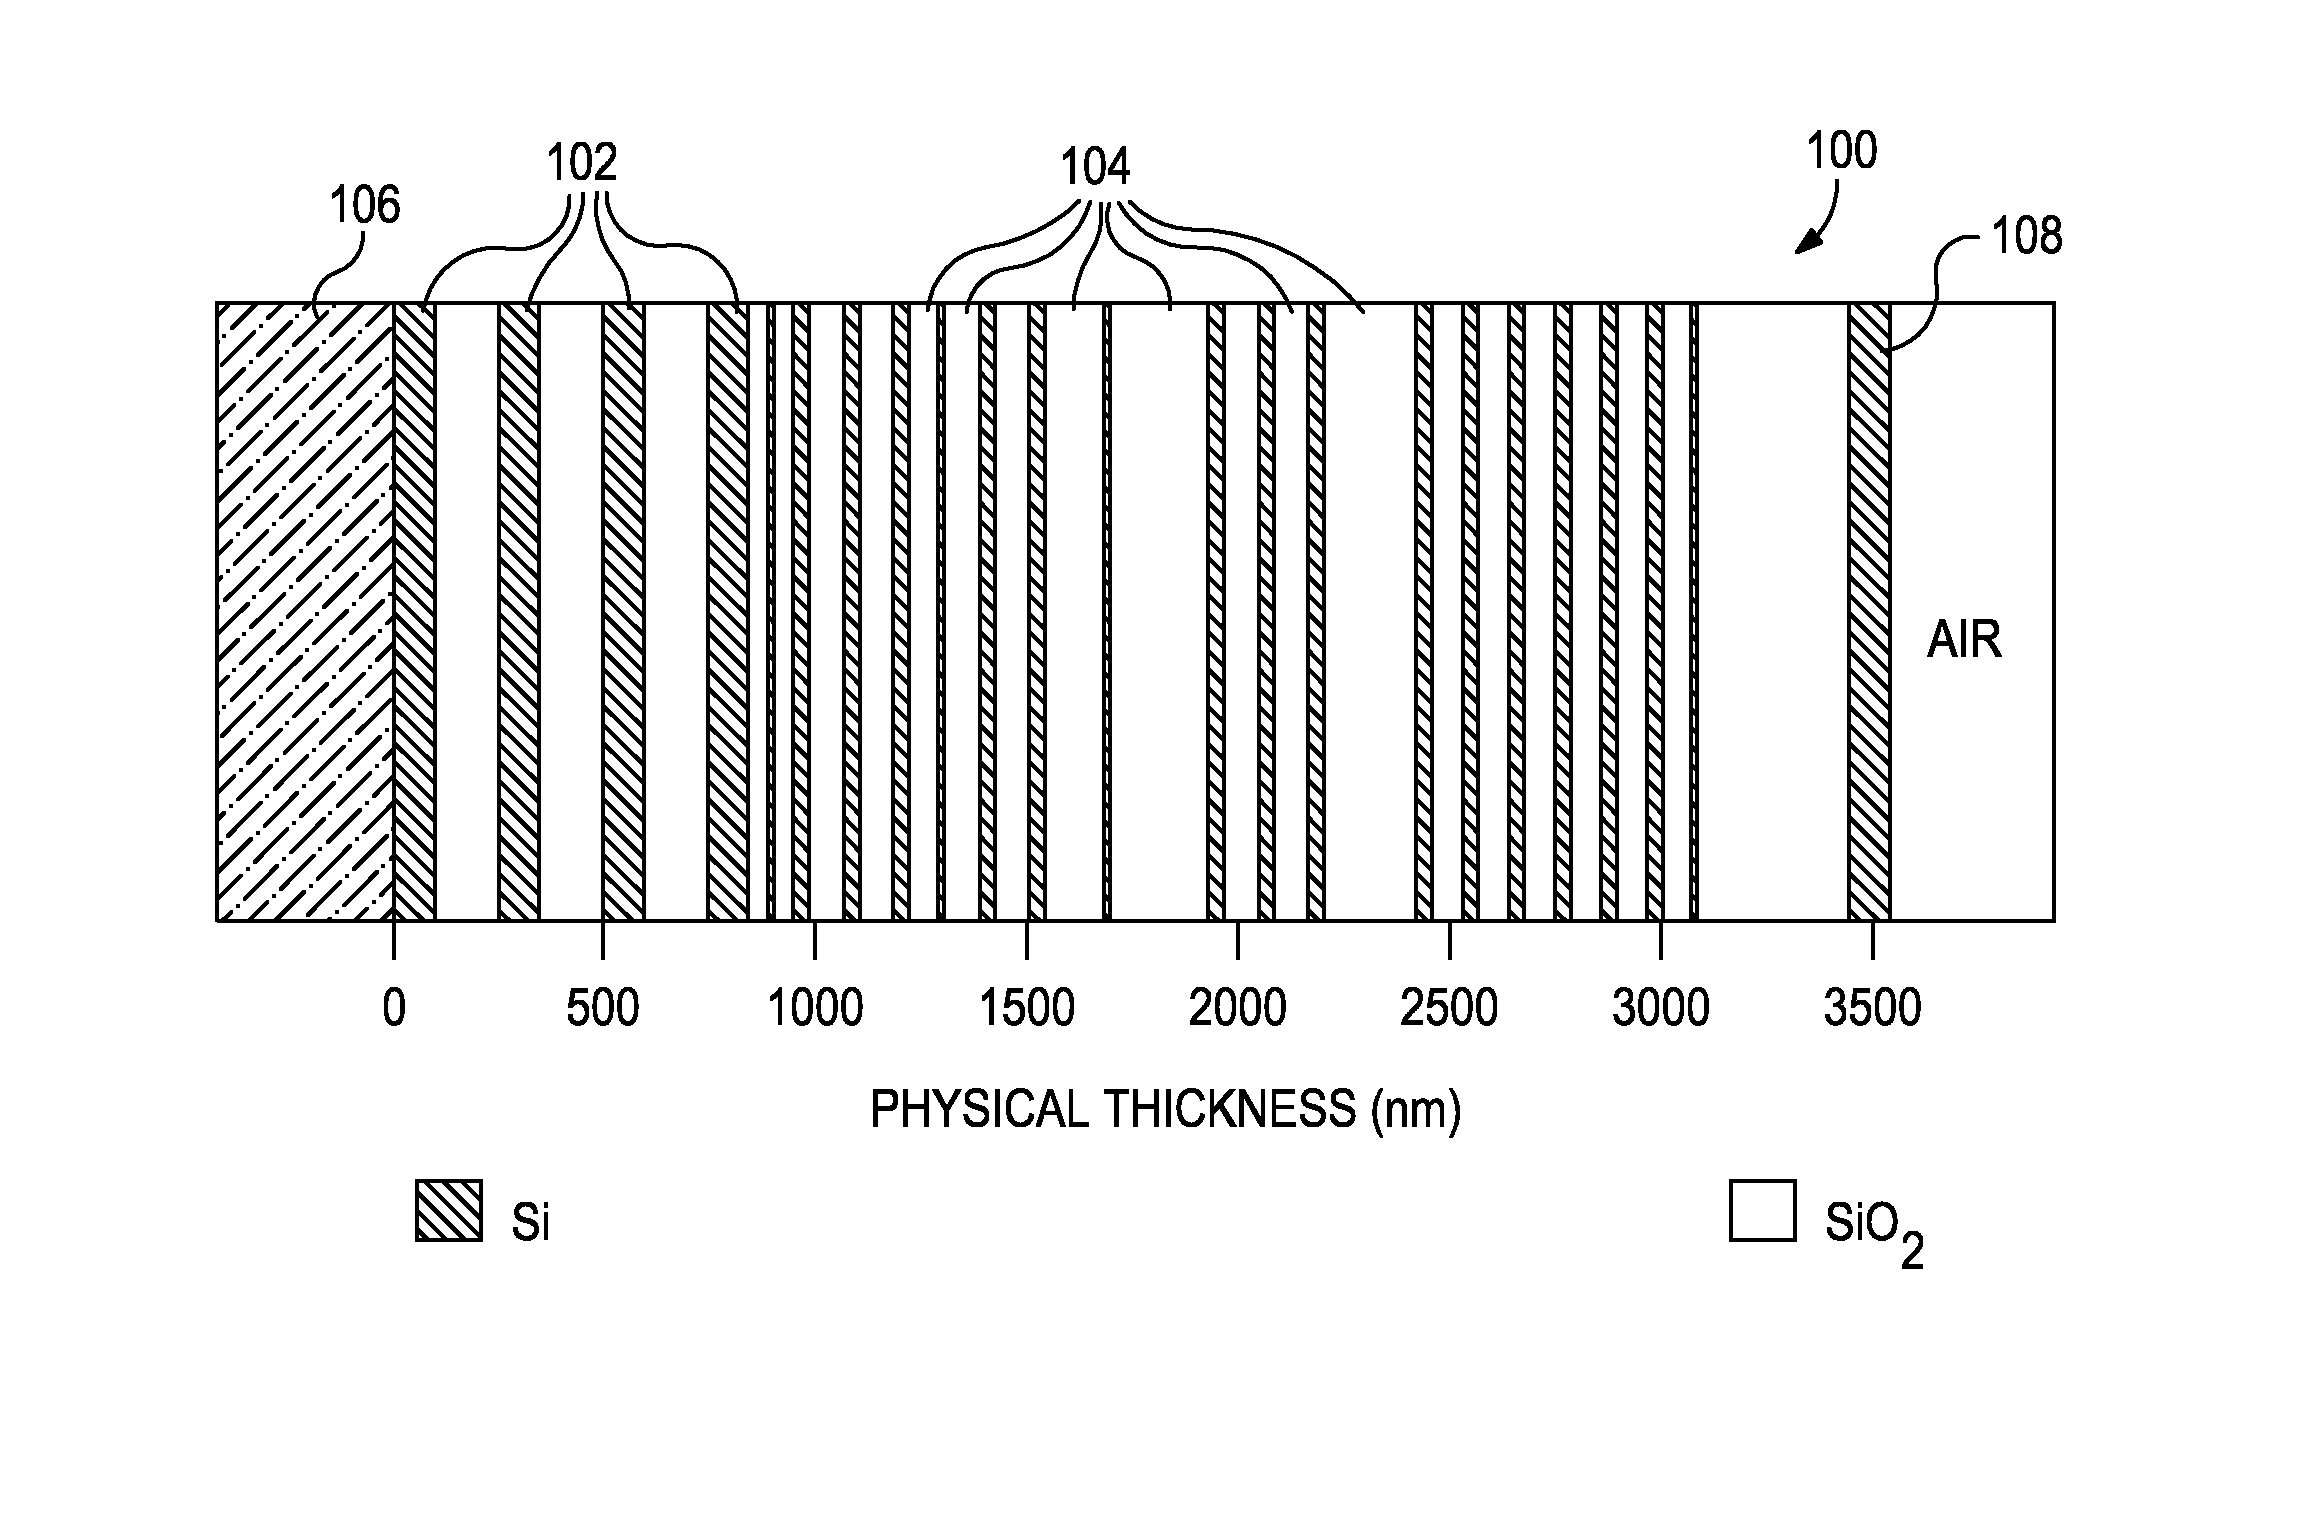 Methods and Devices for Optically Determining A Characteristic of a Substance